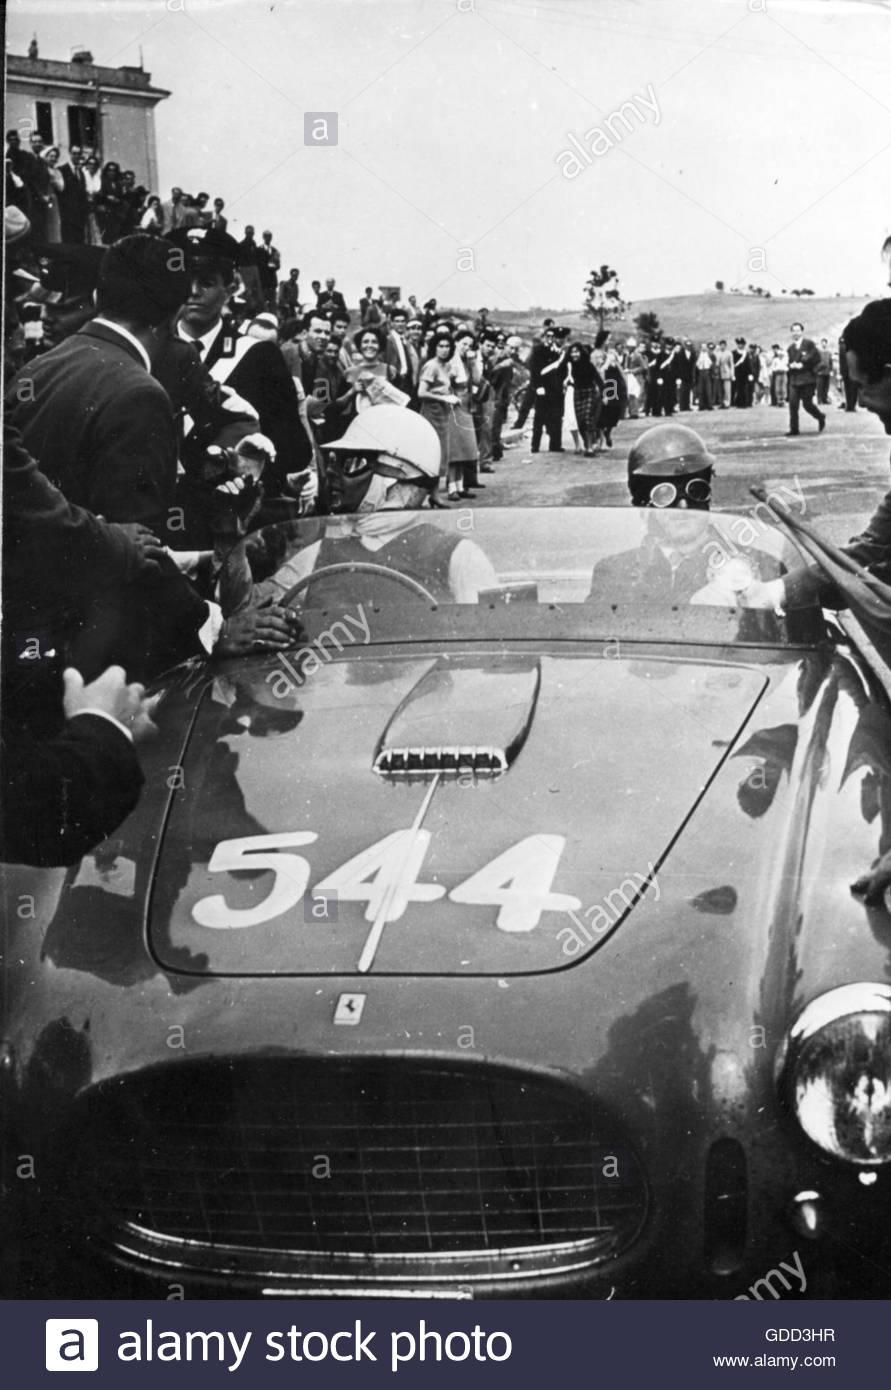 Rossellini as participant of the Mille Miglia car race, Rome, 28.4.1953.